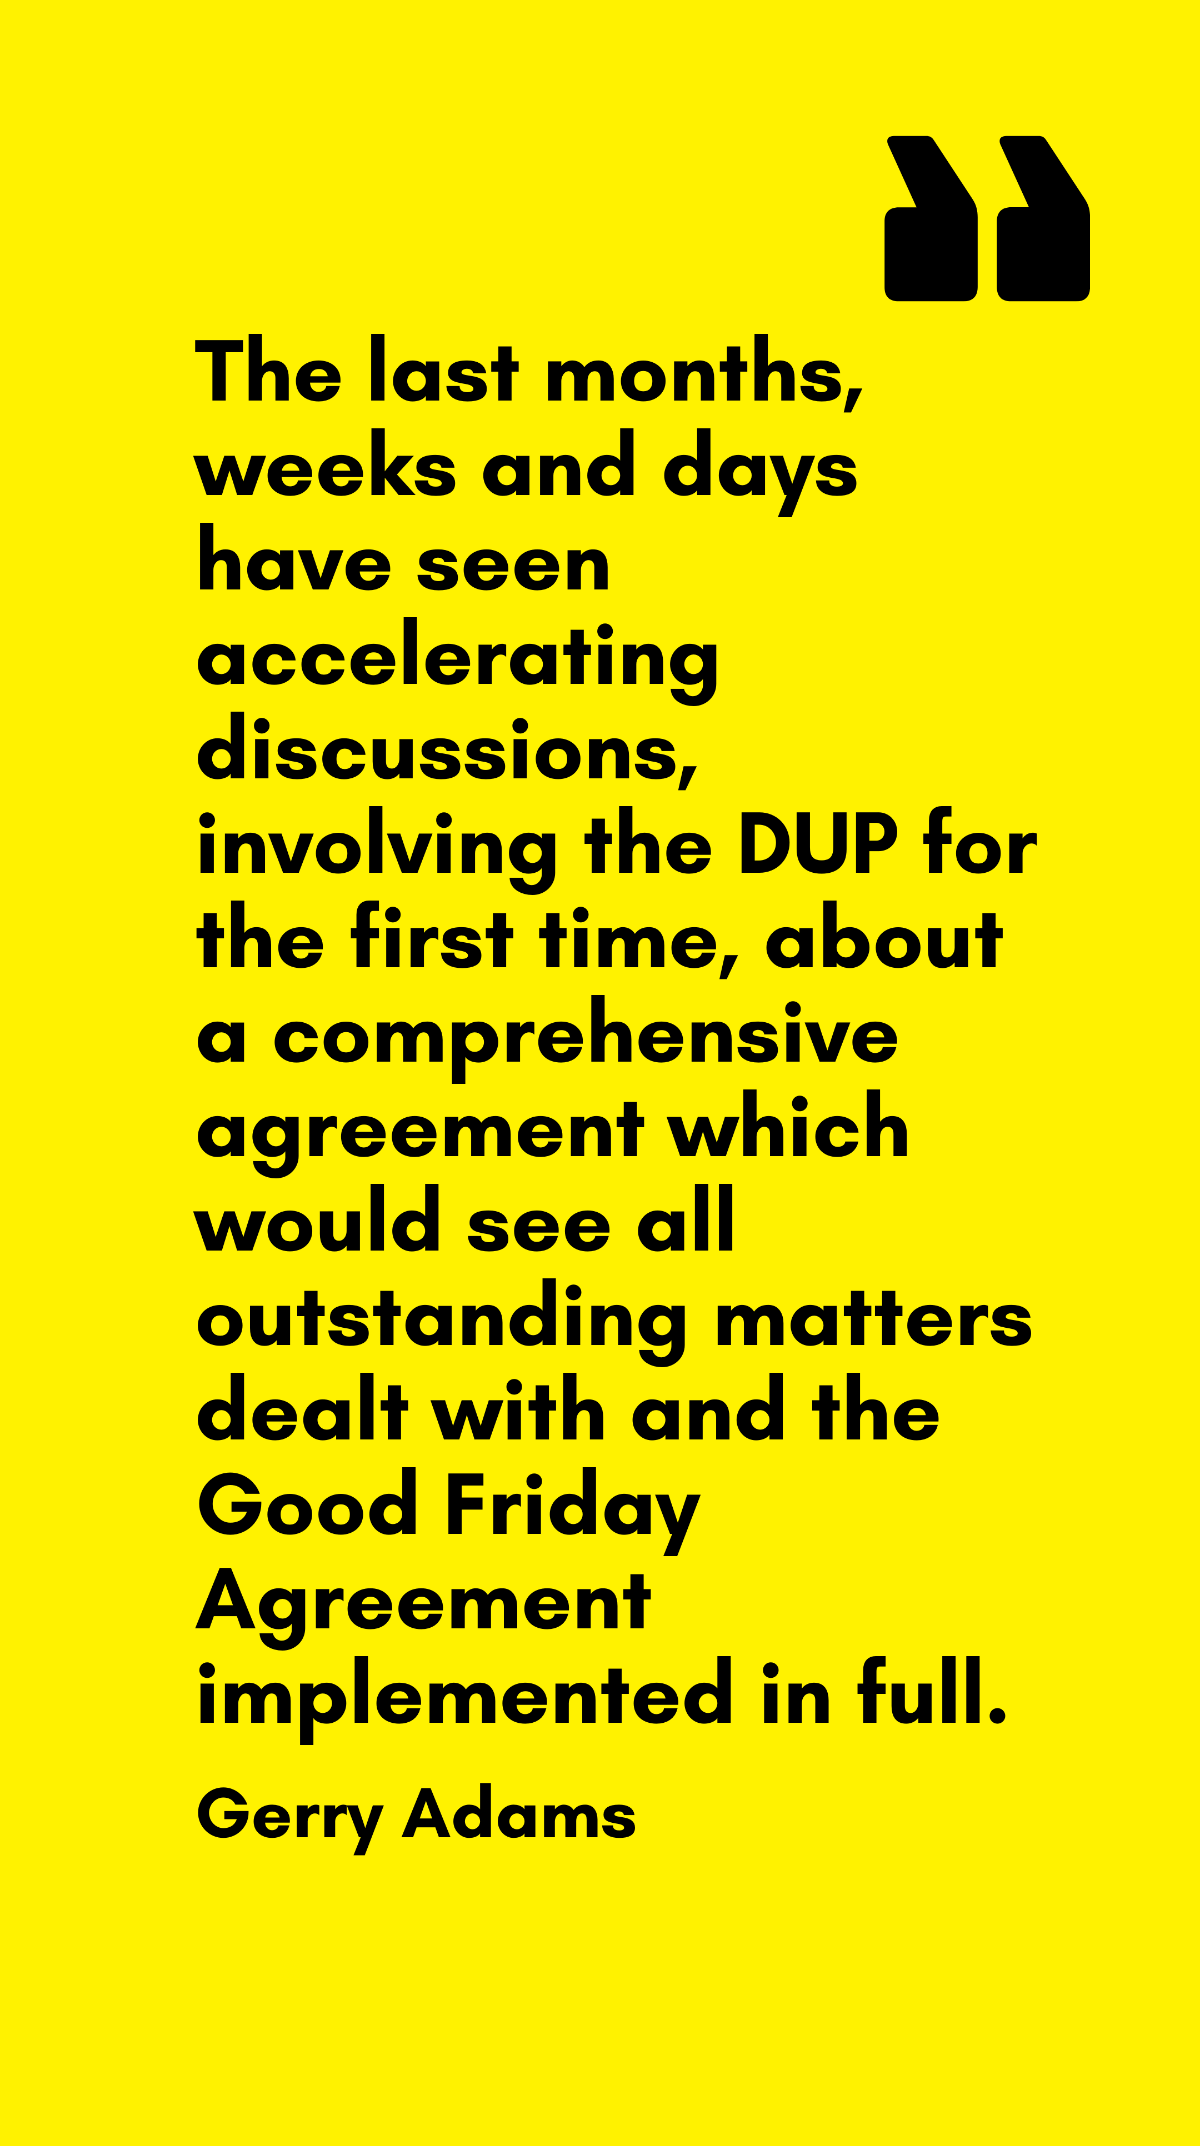 Free Gerry Adams - The last months, weeks and days have seen accelerating discussions, involving the DUP for the first time, about a comprehensive agreement which would see all outstanding matters dealt wi